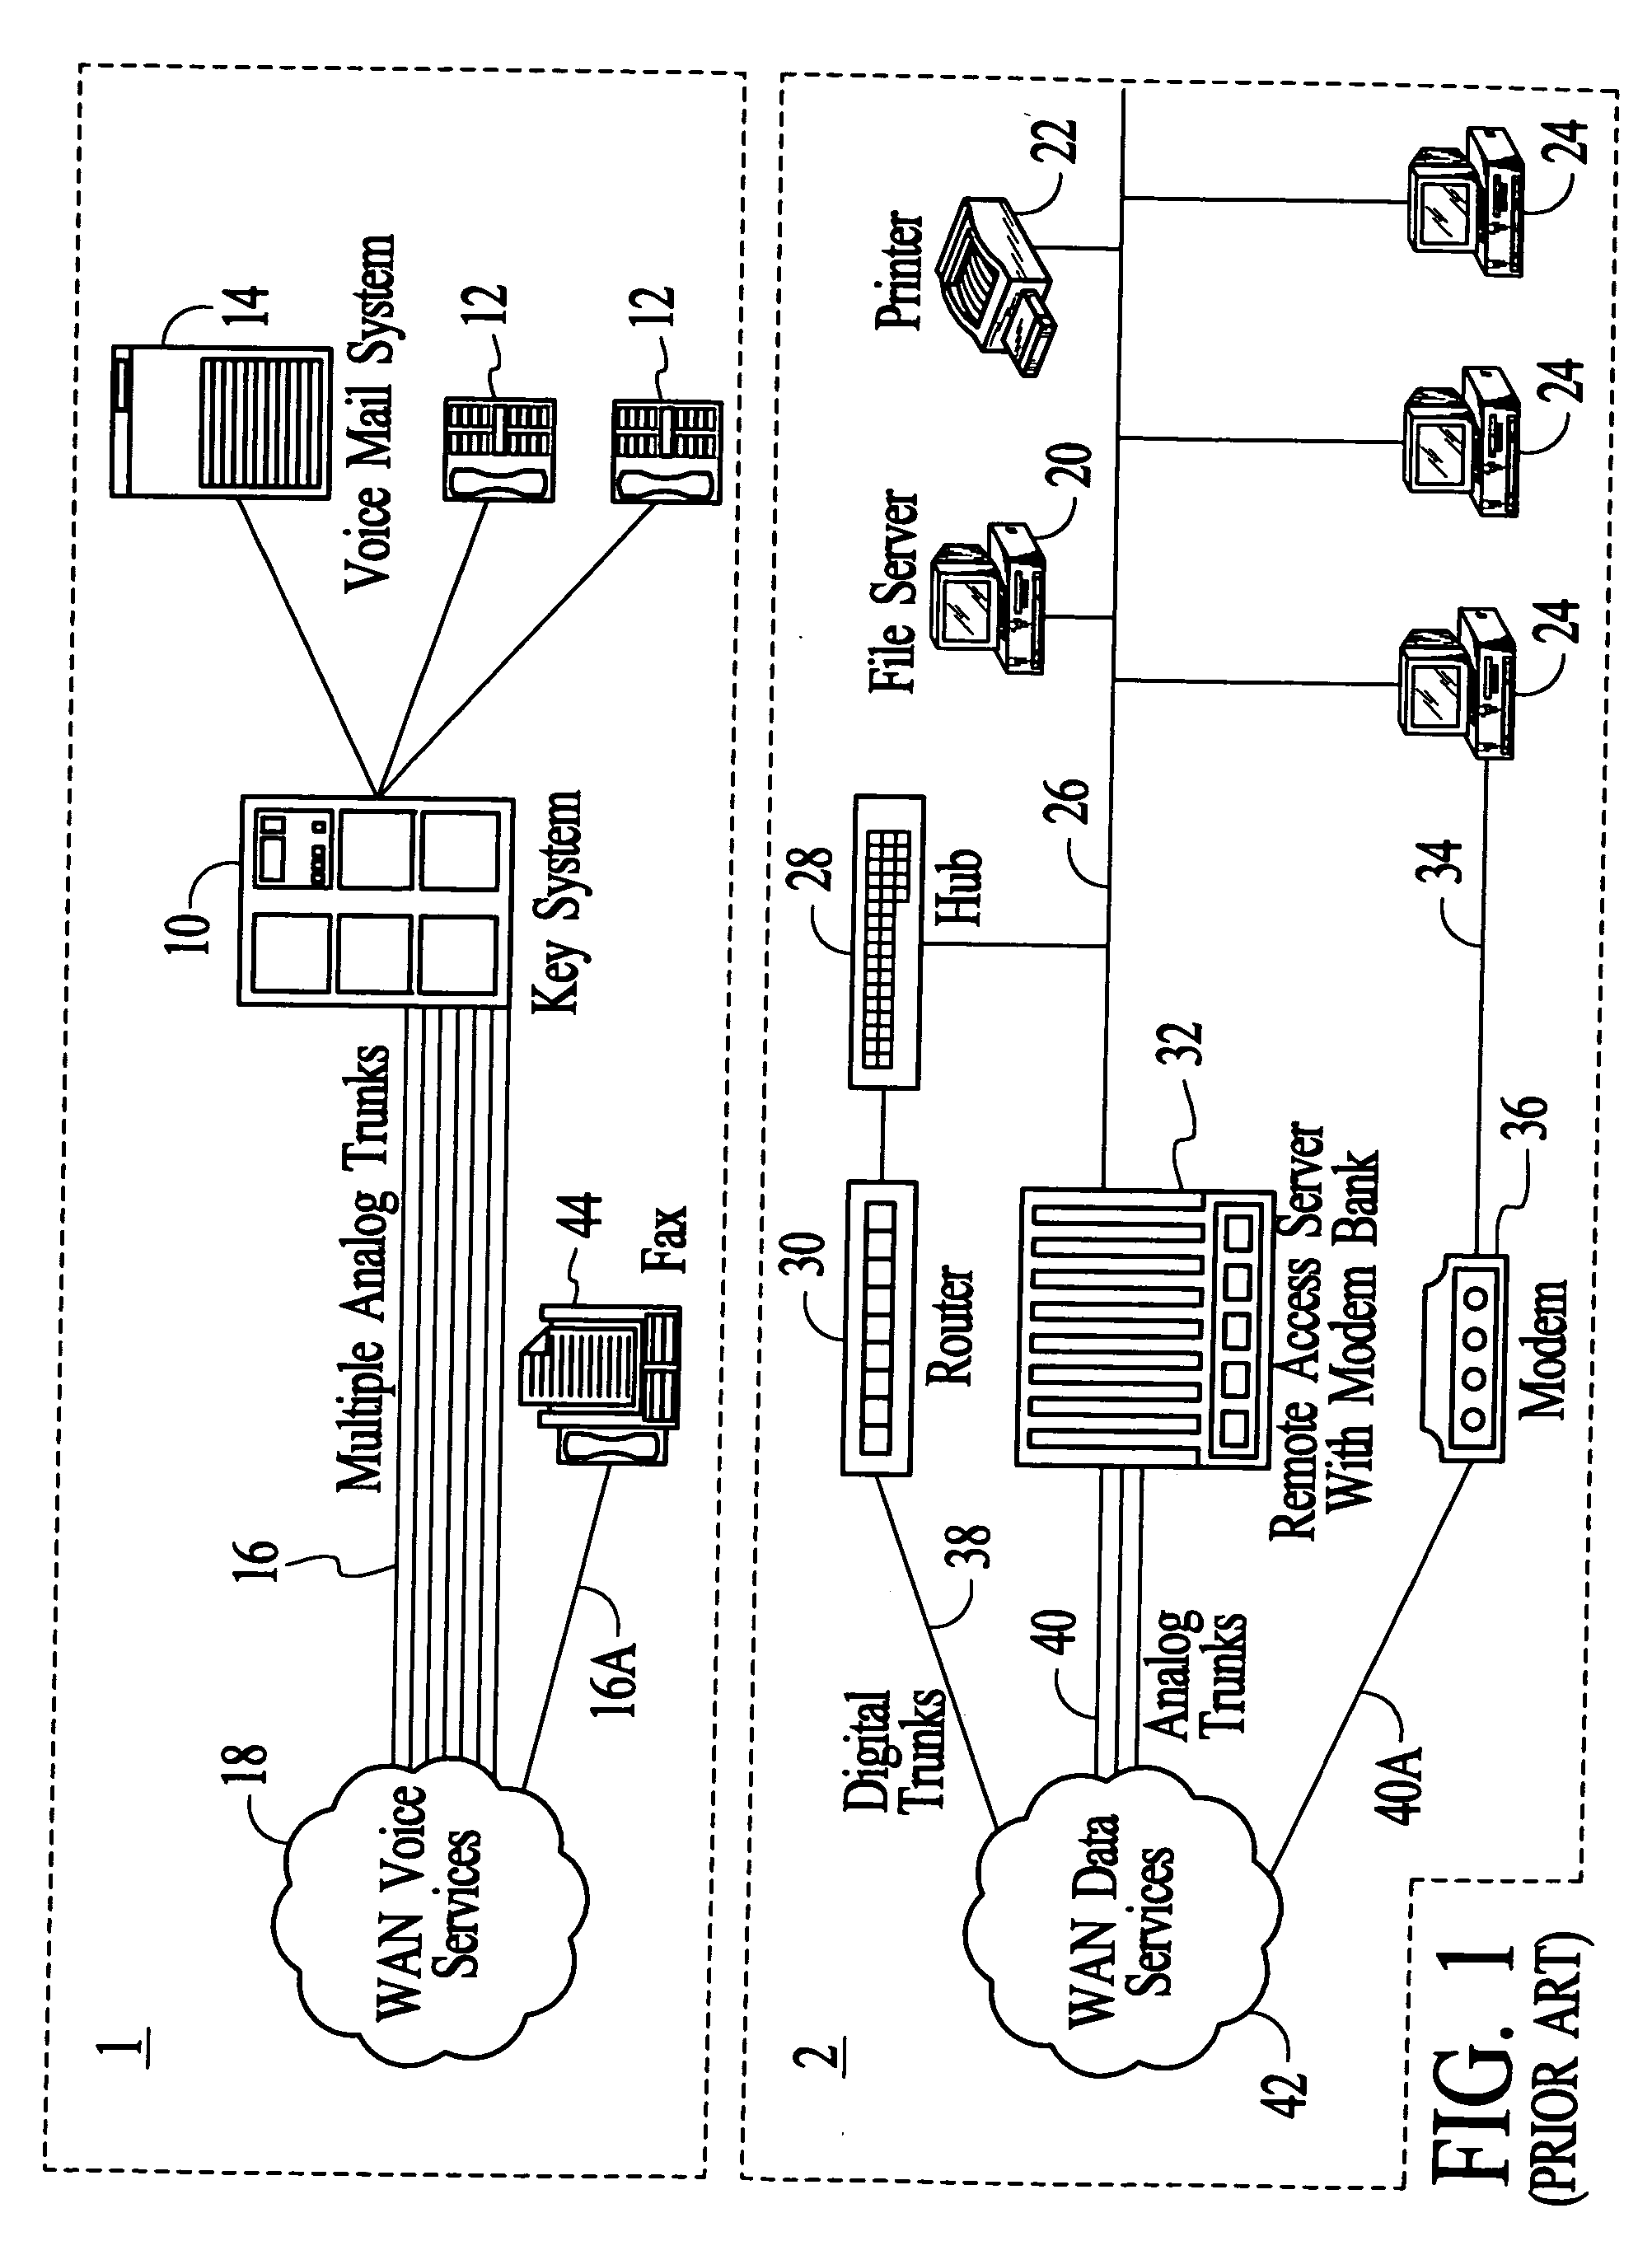 Systems and methods for TDM/packet communications using telephony station cards including voltage generators